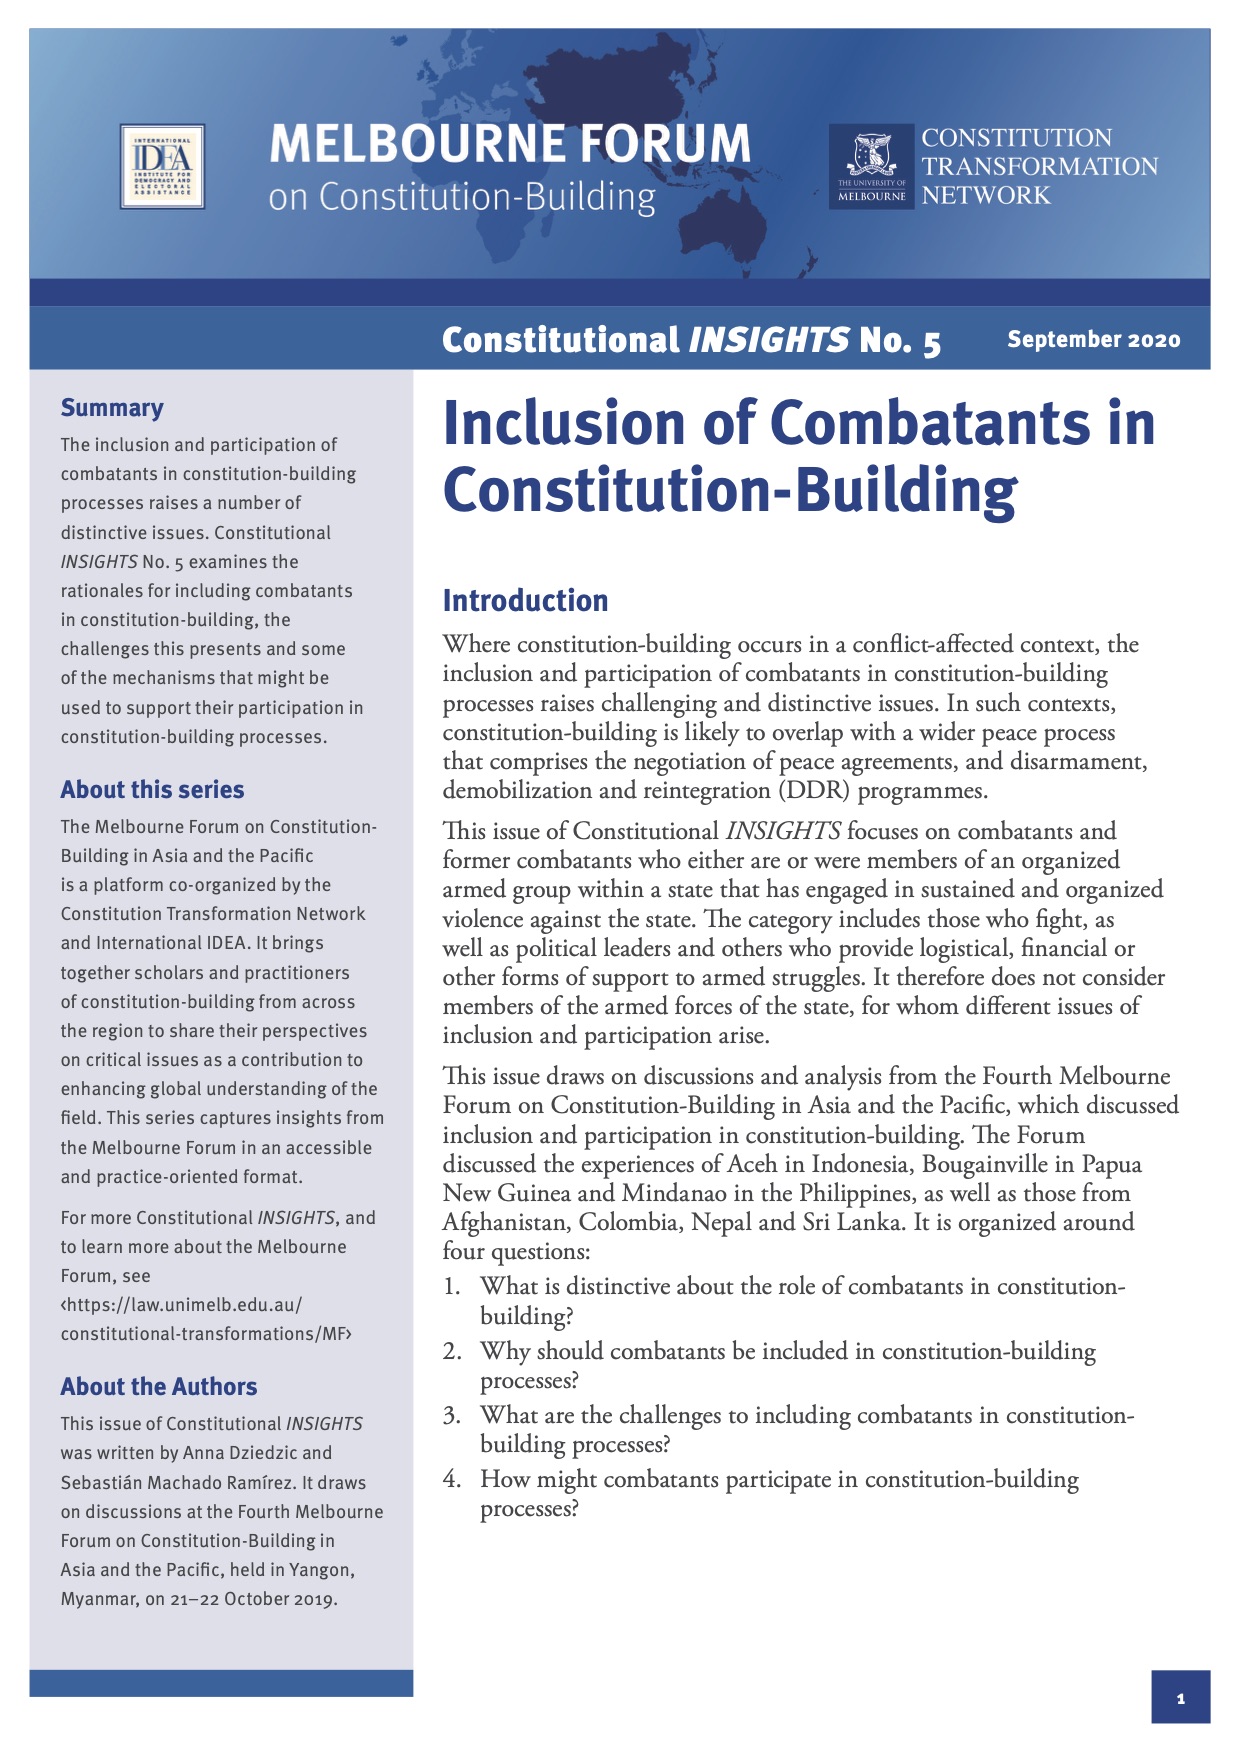 Inclusion of Combatants in Constitution-Building